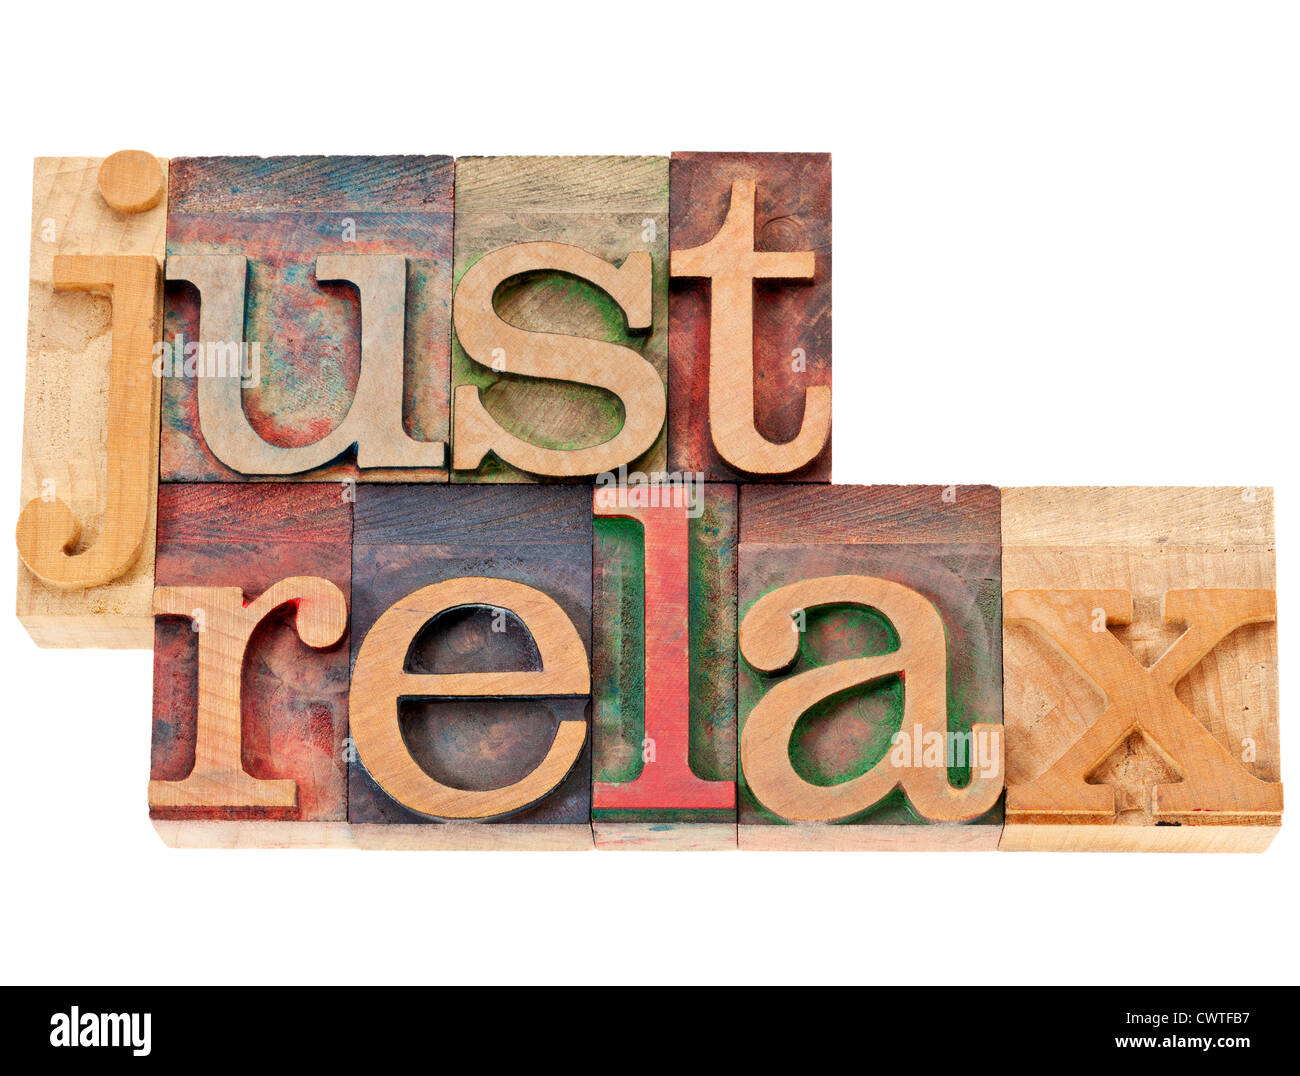 just relax - isolated words in vintage letterpress wood type stained by color inks Stock Photo